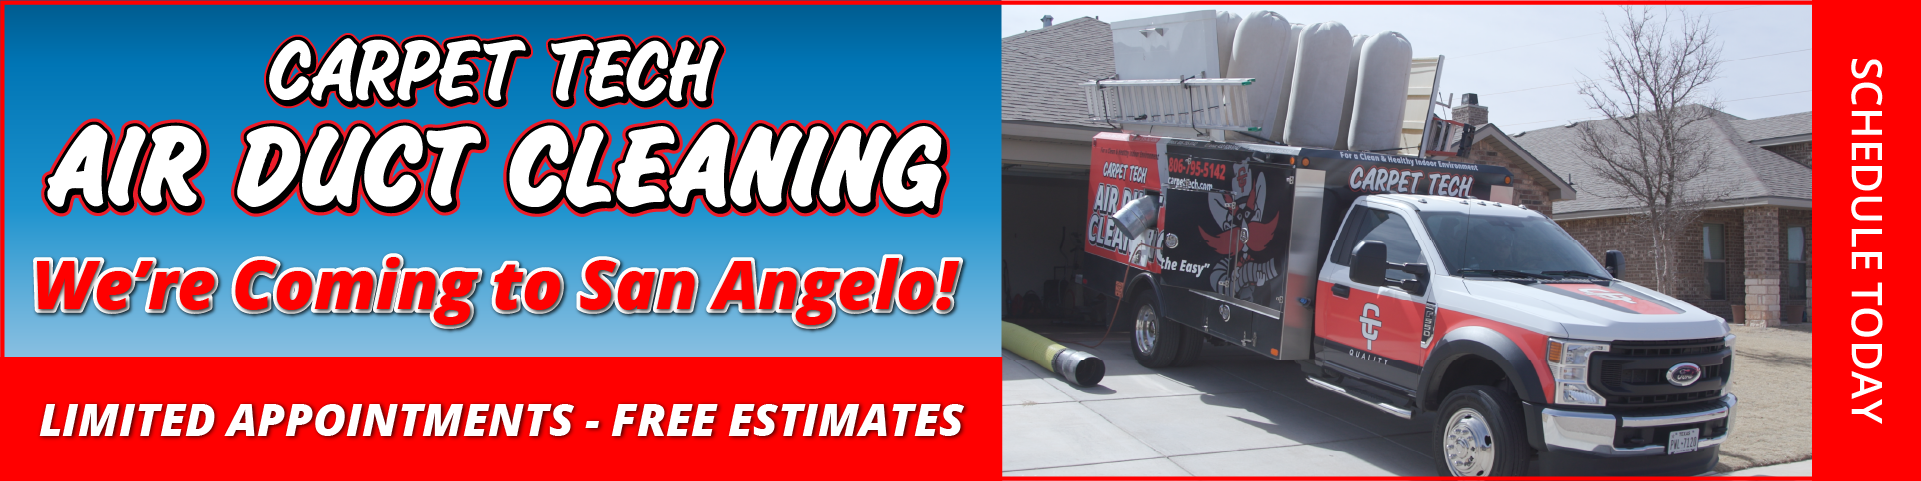 CARPET TECH AIR DUCT CLEANING IS COMING TO SAN ANGELO